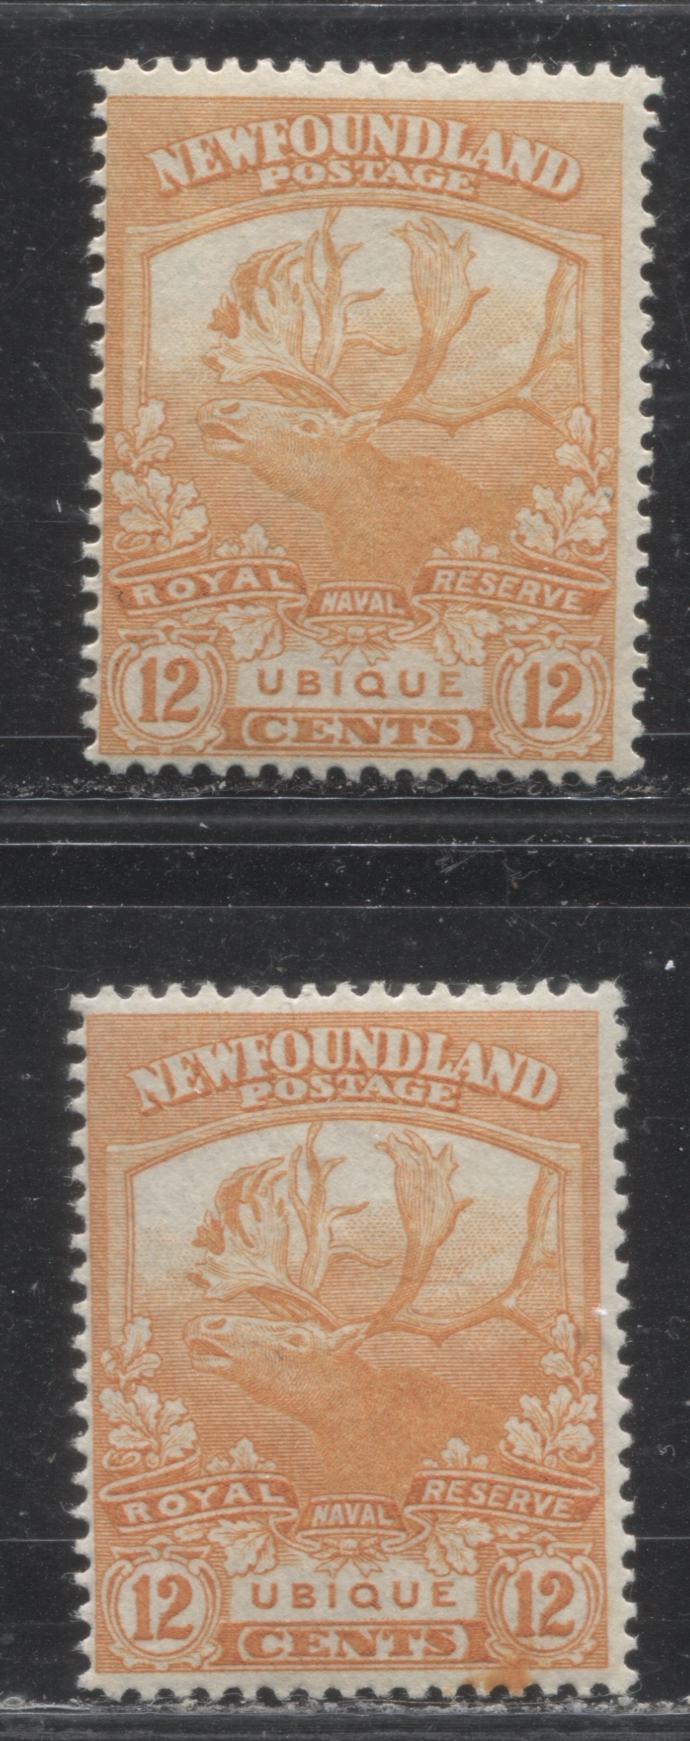 Lot 44 Newfoundland # 123 12c Orange & Yellow Orange Caribou & Ubique, 1919-1923 Trail of the Caribou Issue, Two Fine OG Examples, Line Perf. 14.2 x 14 and 14 x 13.9